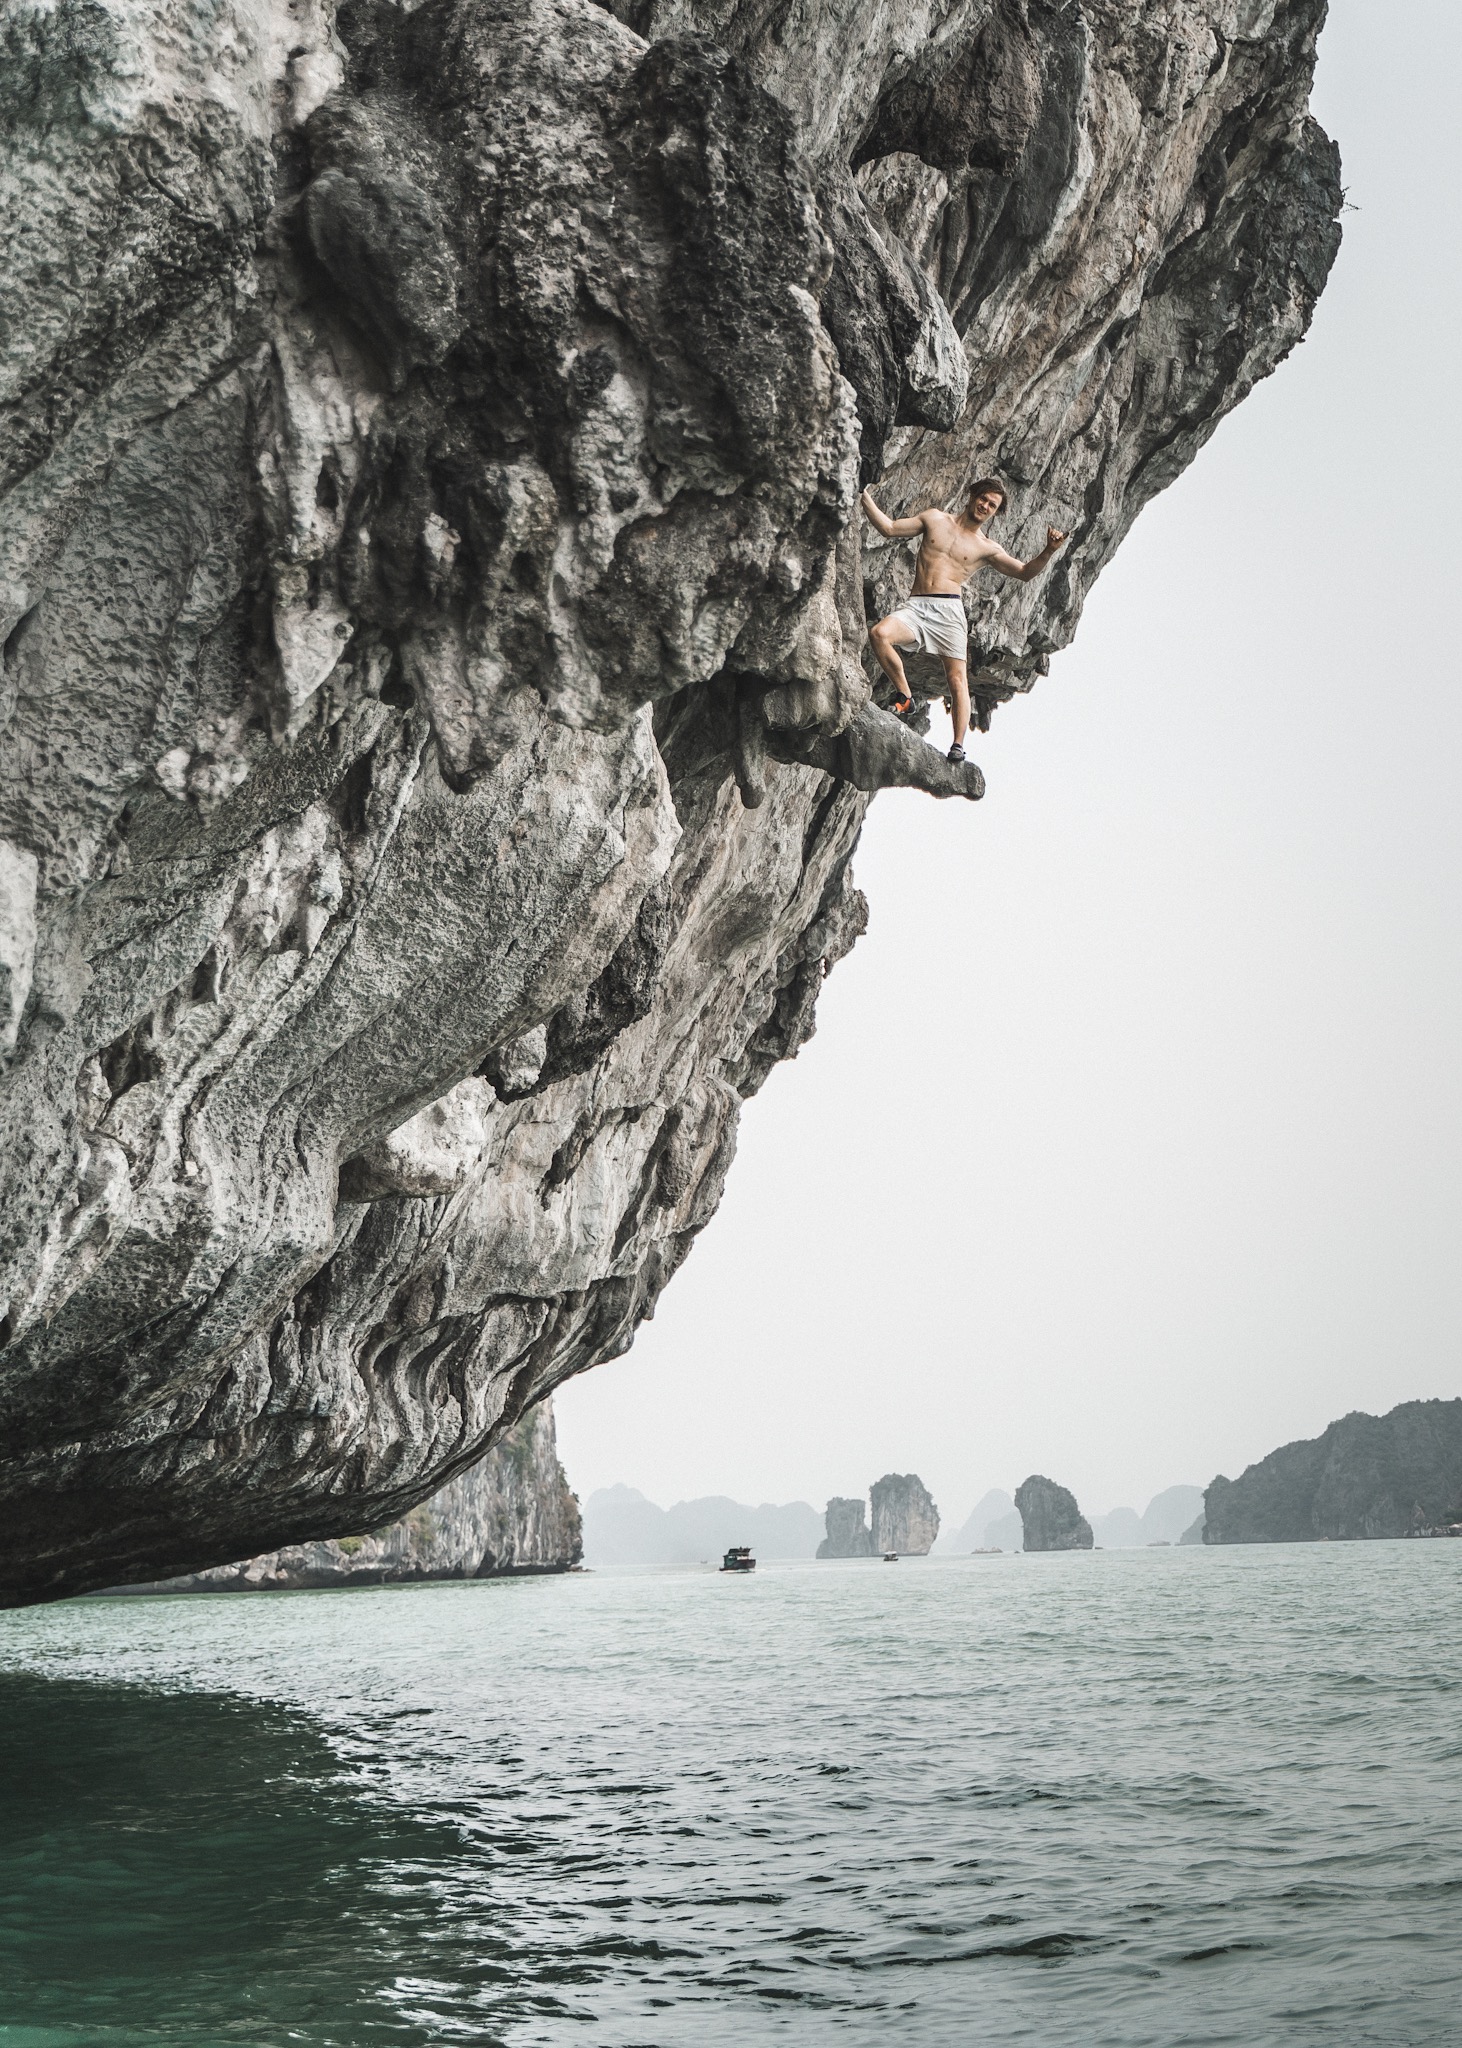 Climbing without rope(soloing) above the sea